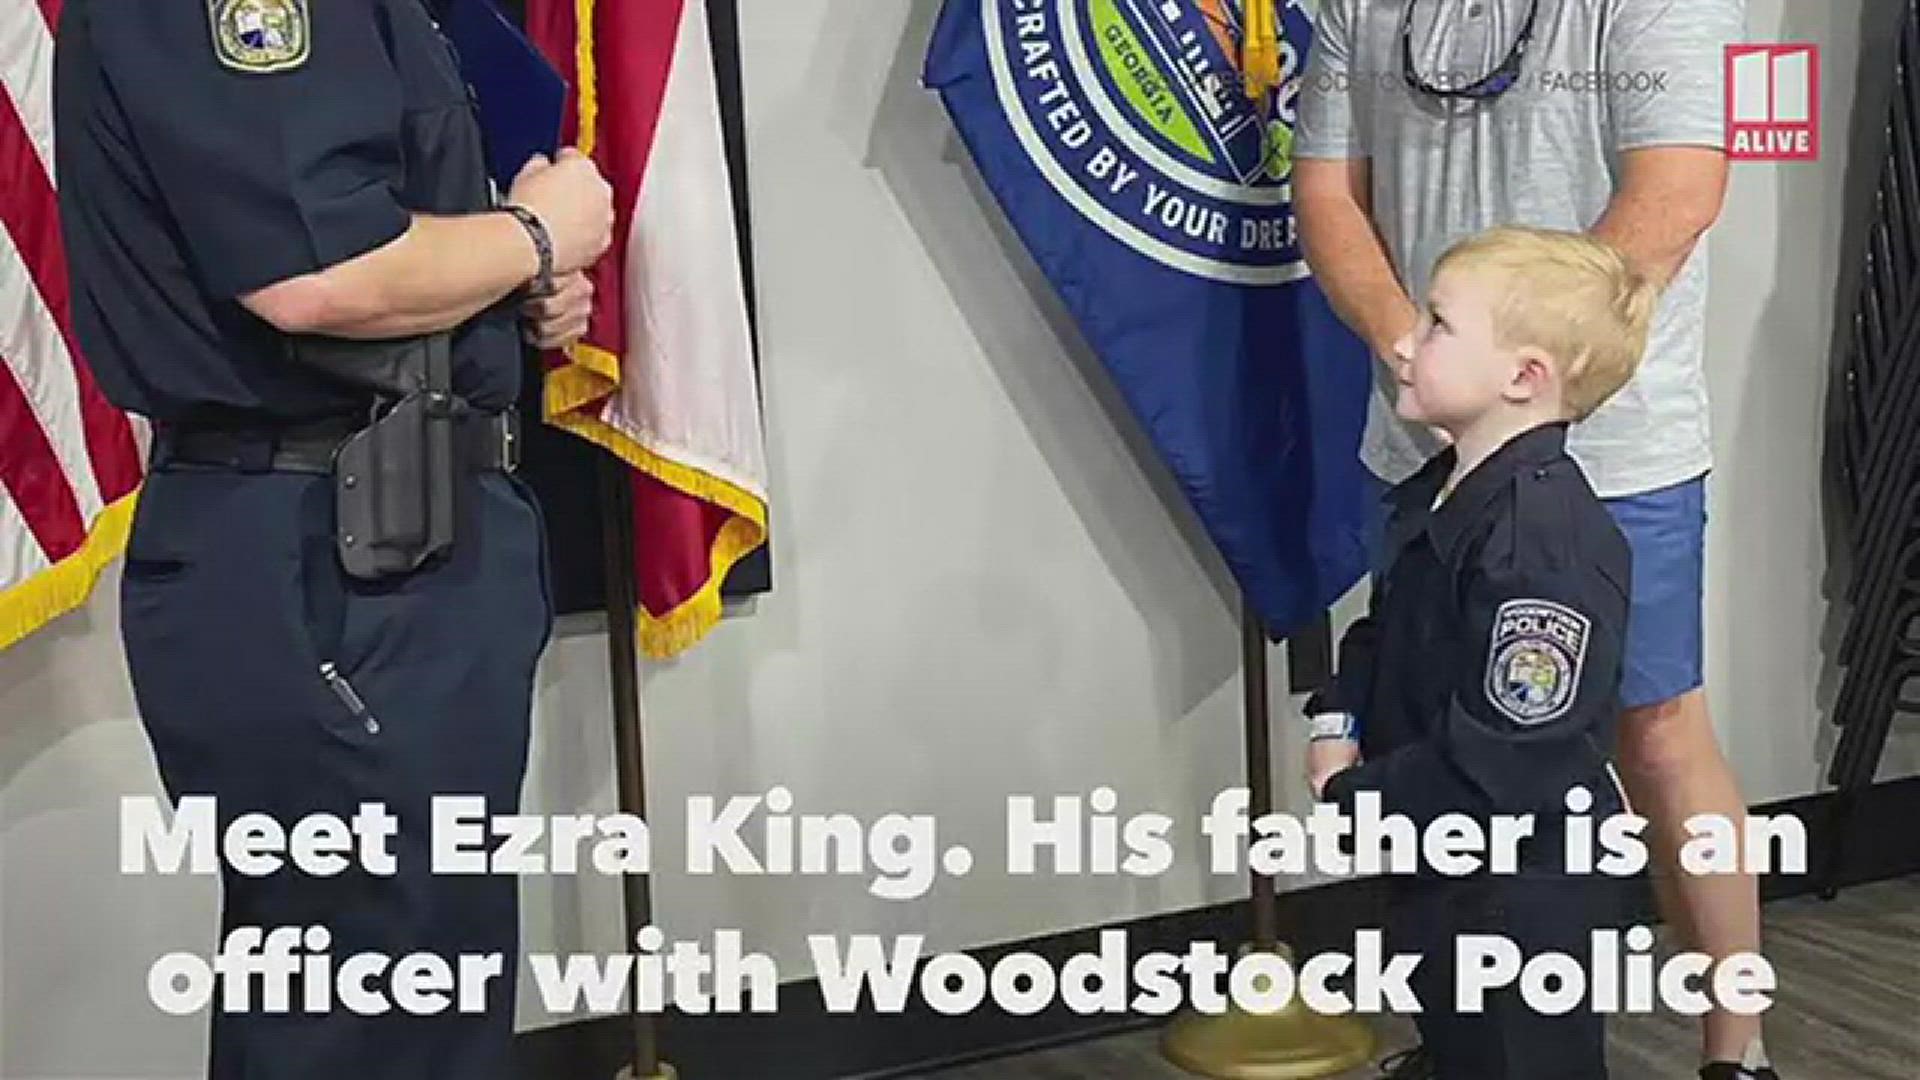 Little Ezra King is now a part of the law enforcement community like his father. He was diagnosed with cancer at 18 months.